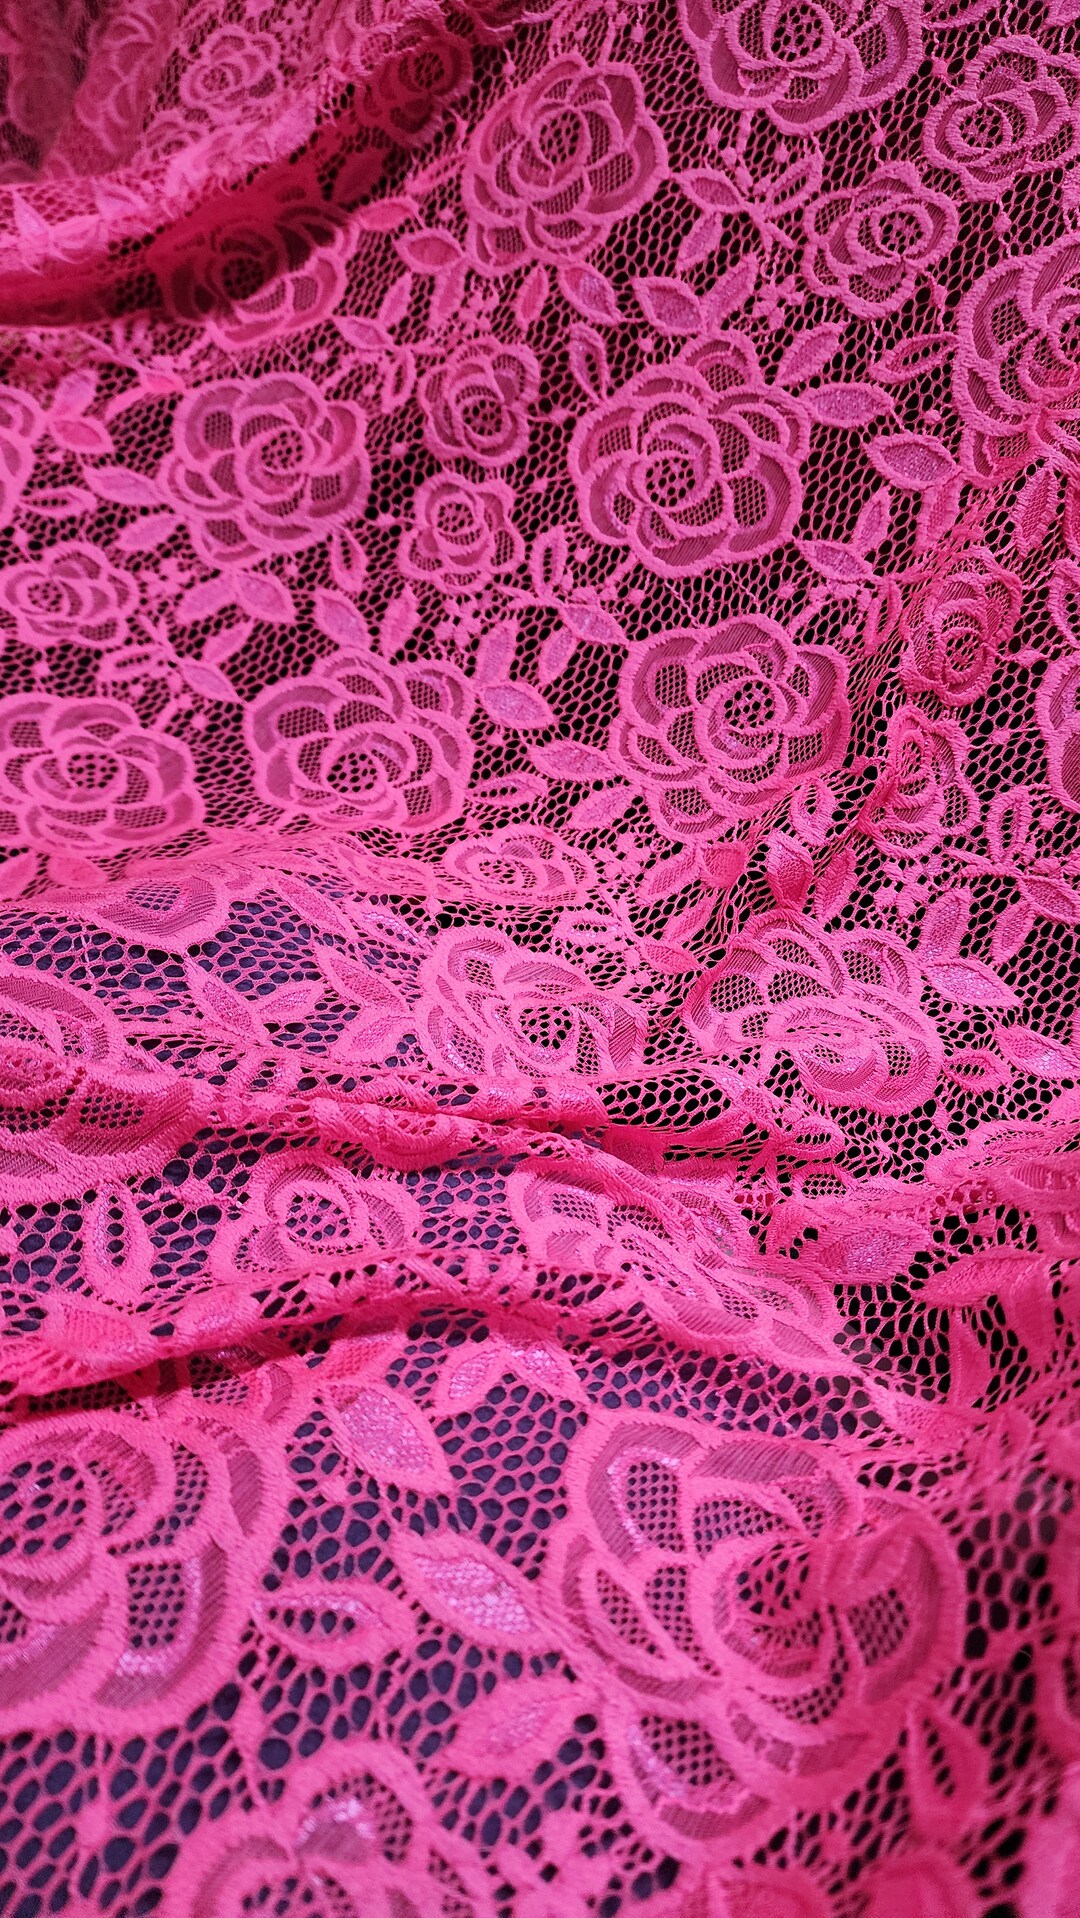 Stretch Hot Pink Lace Fabric 58 Inches Wide Sold by Yard - Etsy